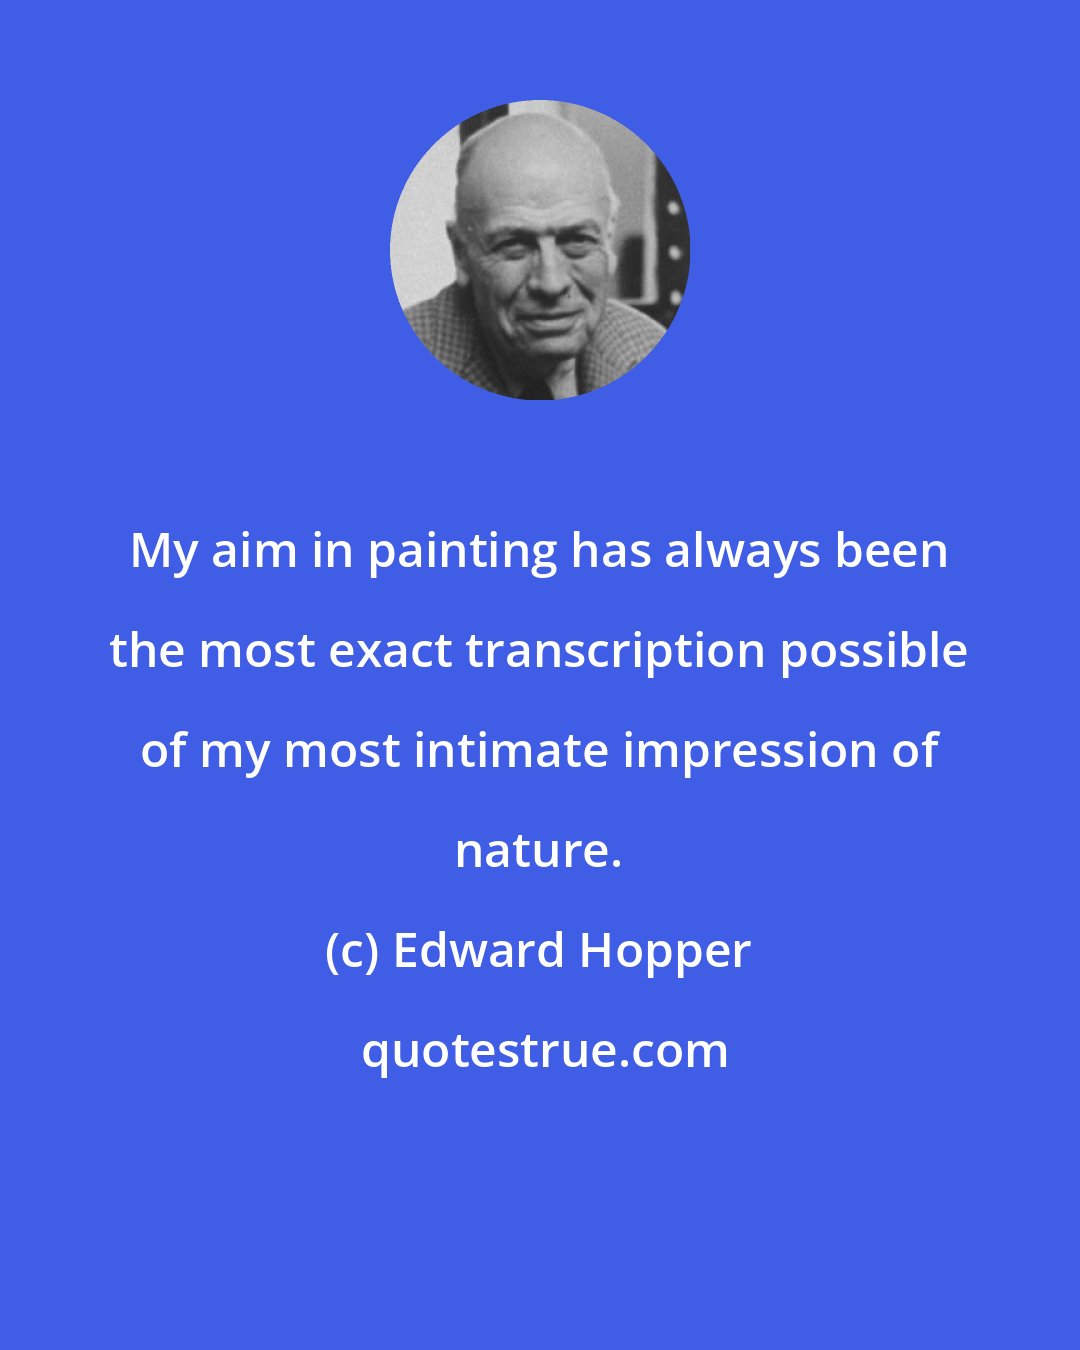 Edward Hopper: My aim in painting has always been the most exact transcription possible of my most intimate impression of nature.